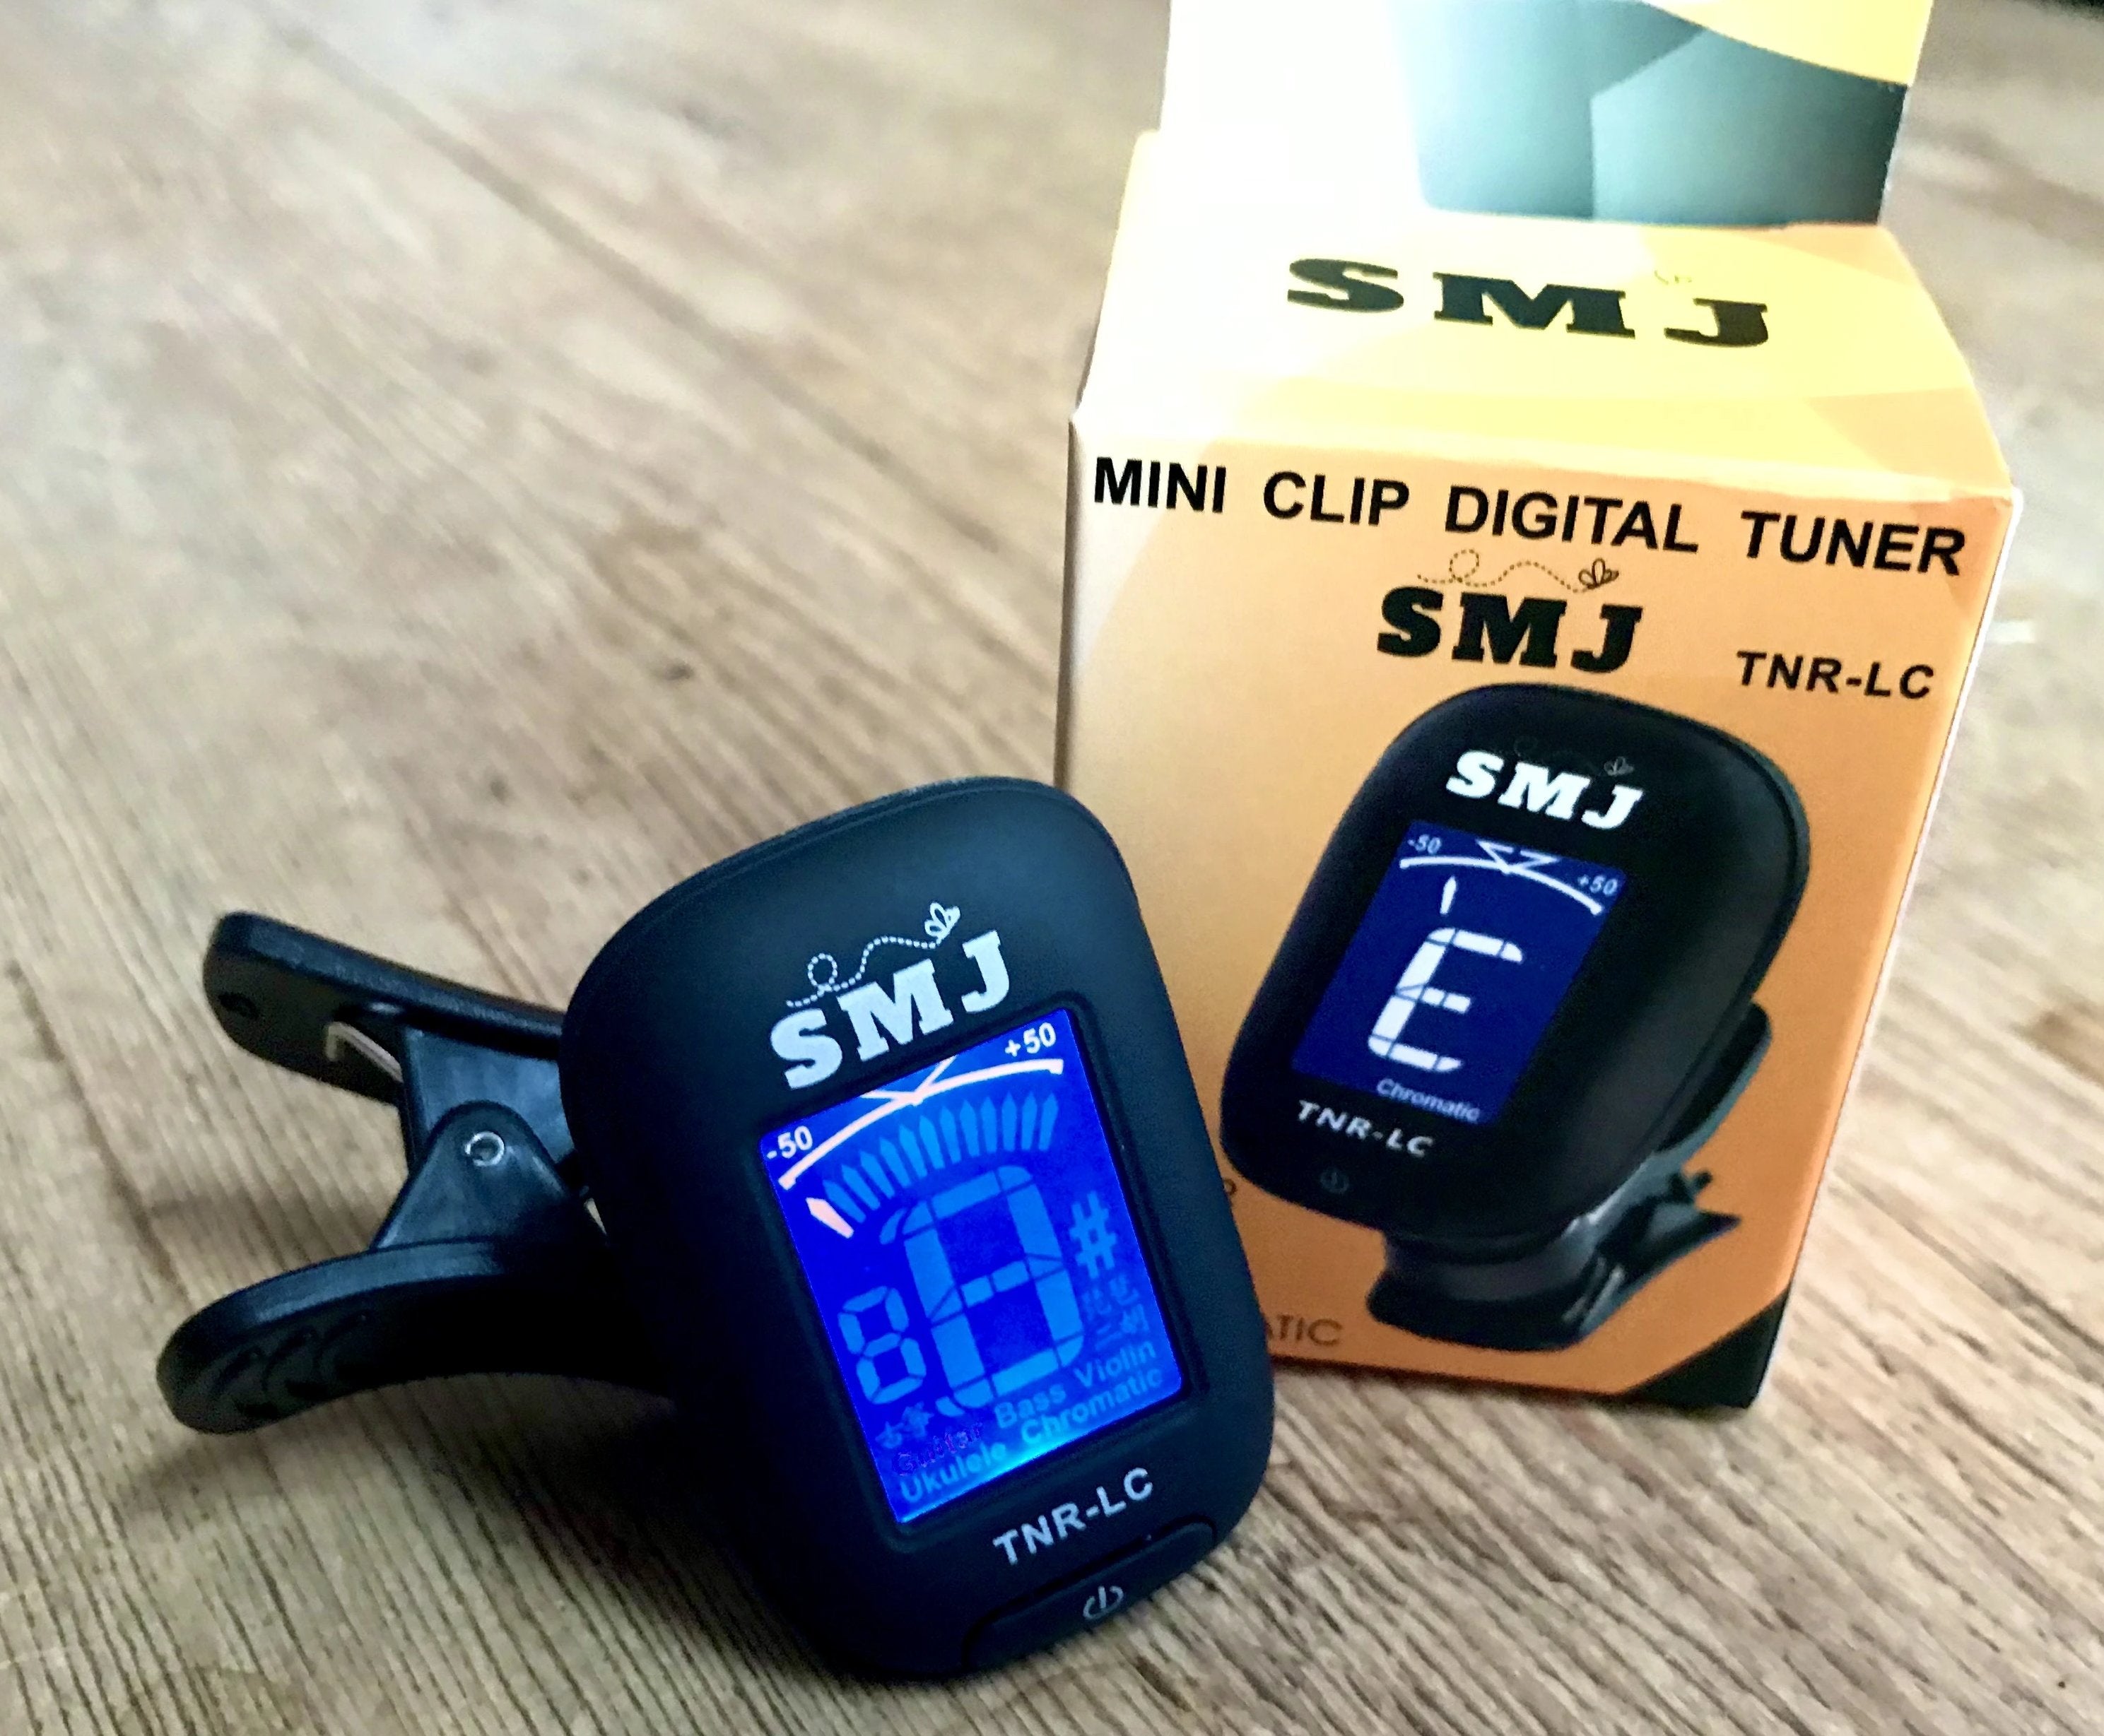 SMJ TNR "Headstock" Guitar Tuner, Accessory for sale at Richards Guitars.